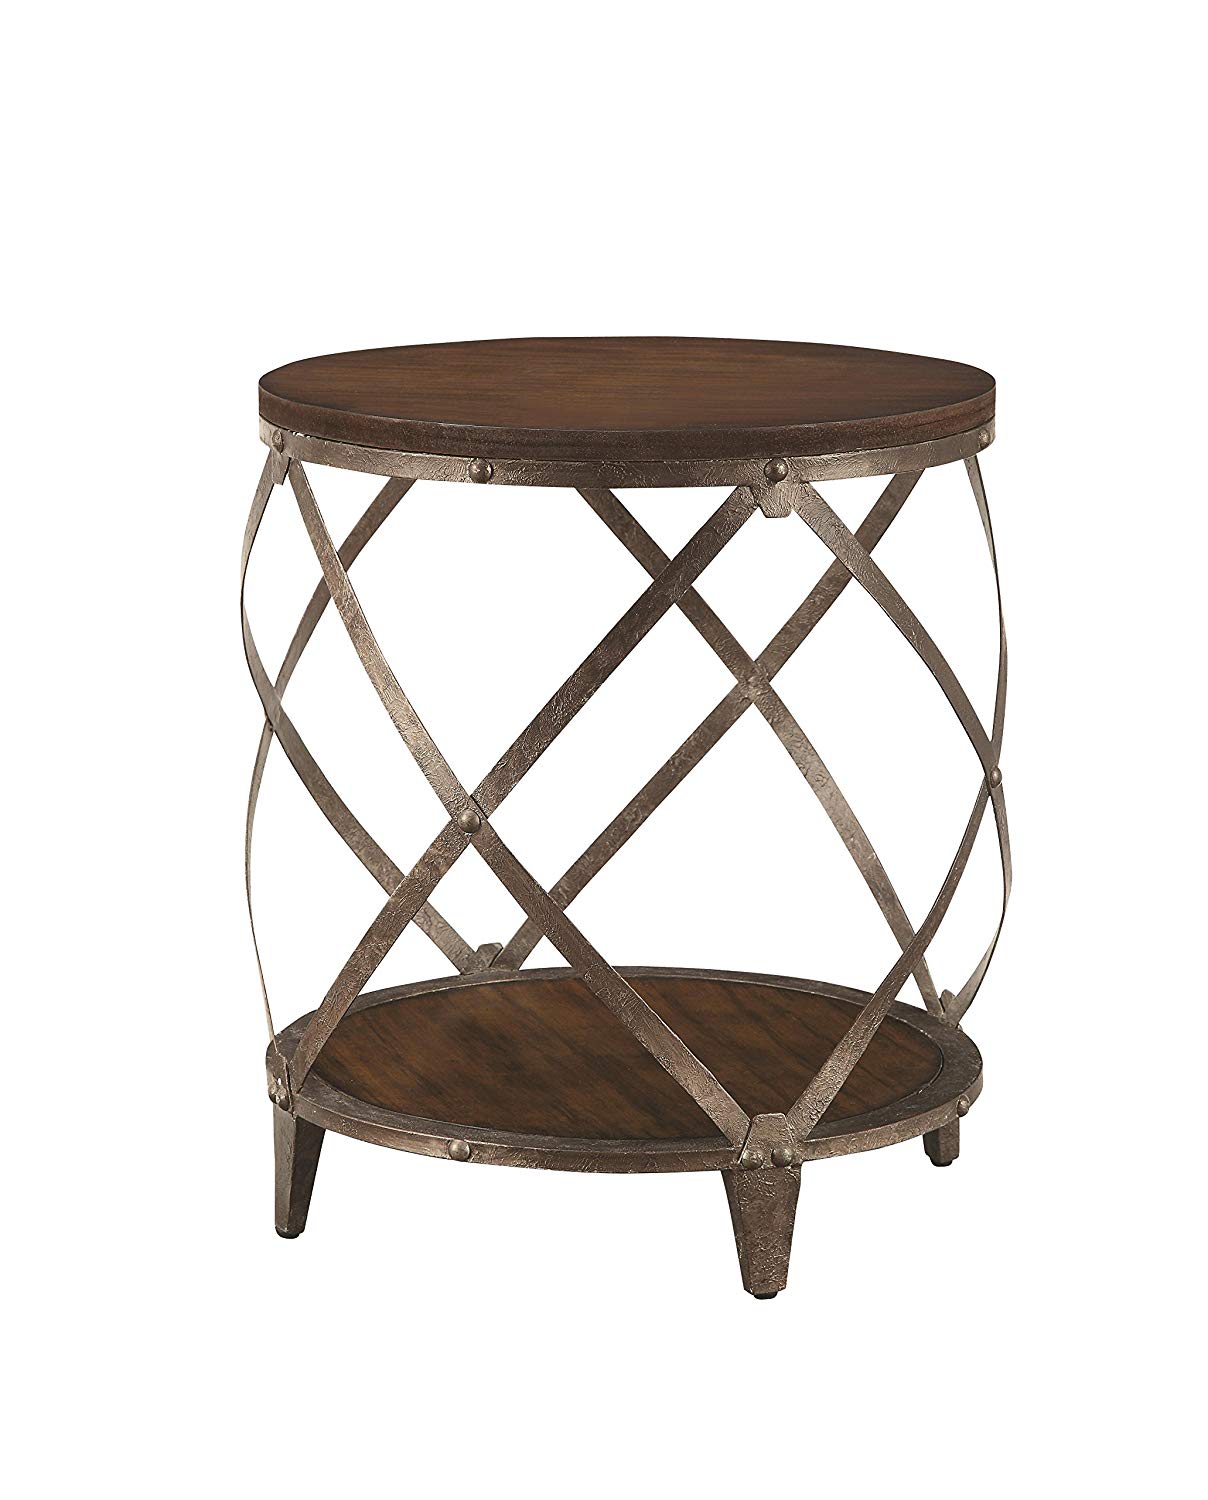 metal accent table with drum shape brown kitchen dining threshold round target gold side bar counter nautical wall lamps concrete outdoor bunnings legs sun umbrella small antique